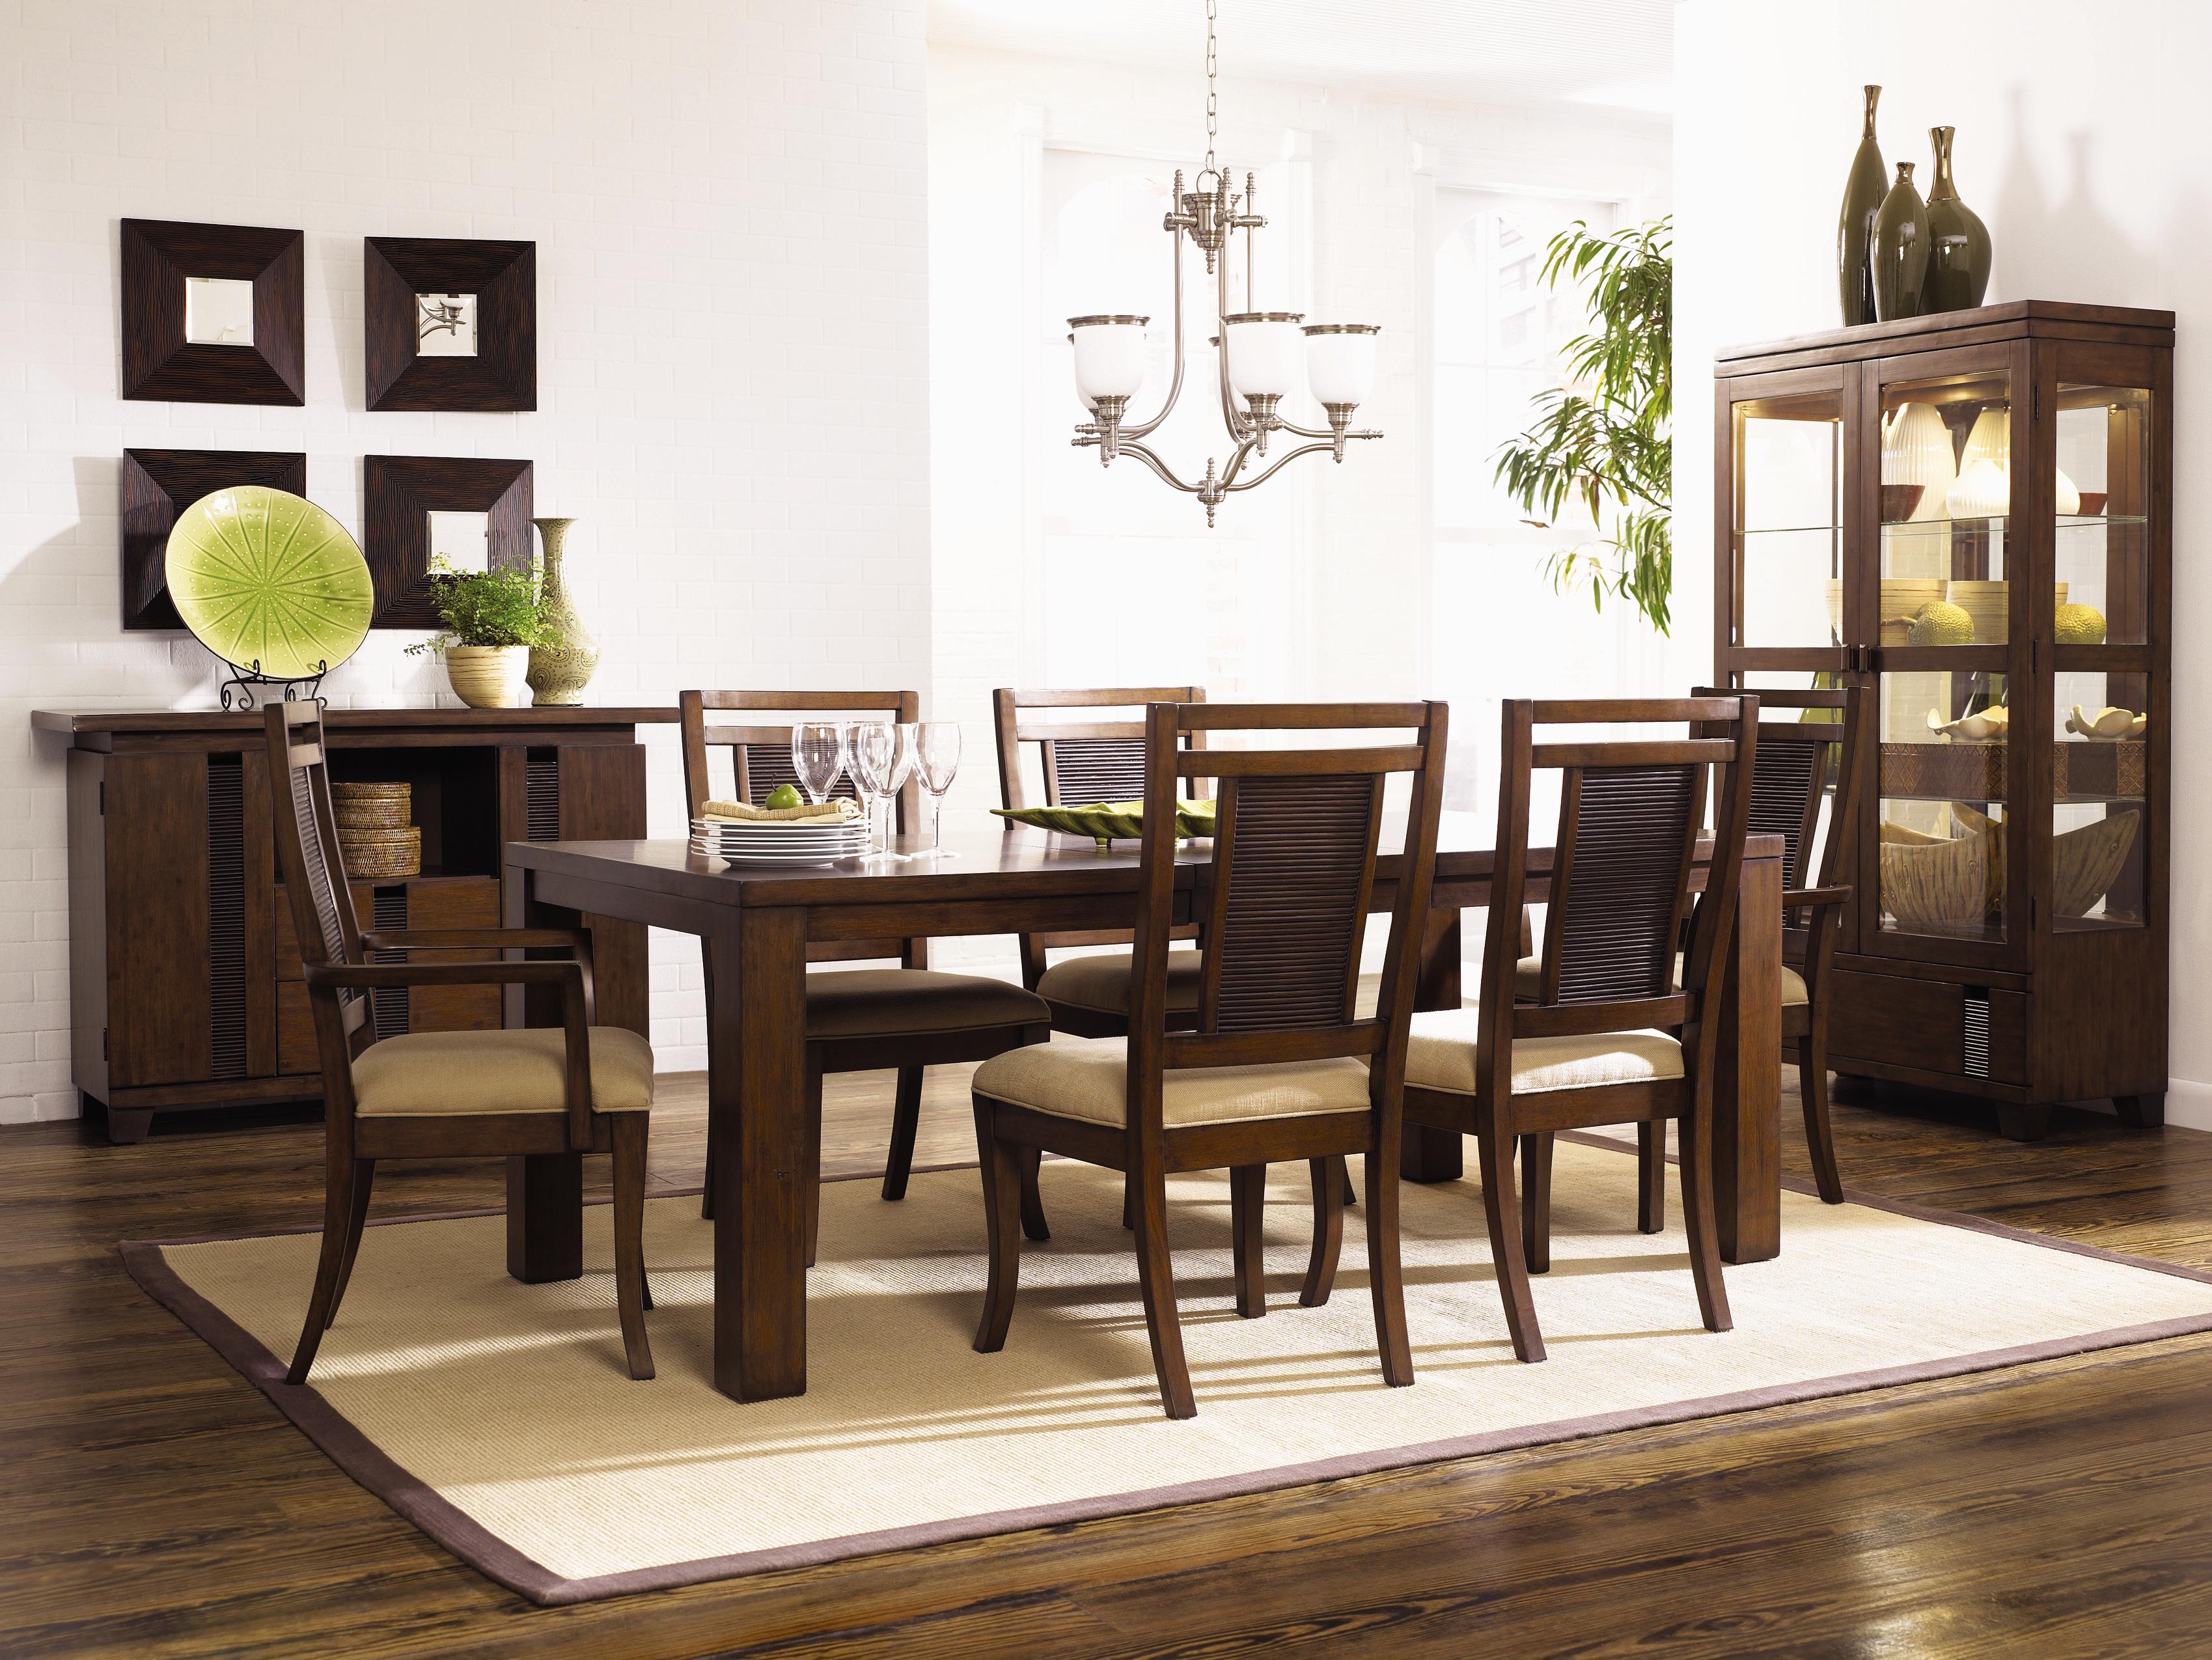 All Wood Furniture Stores